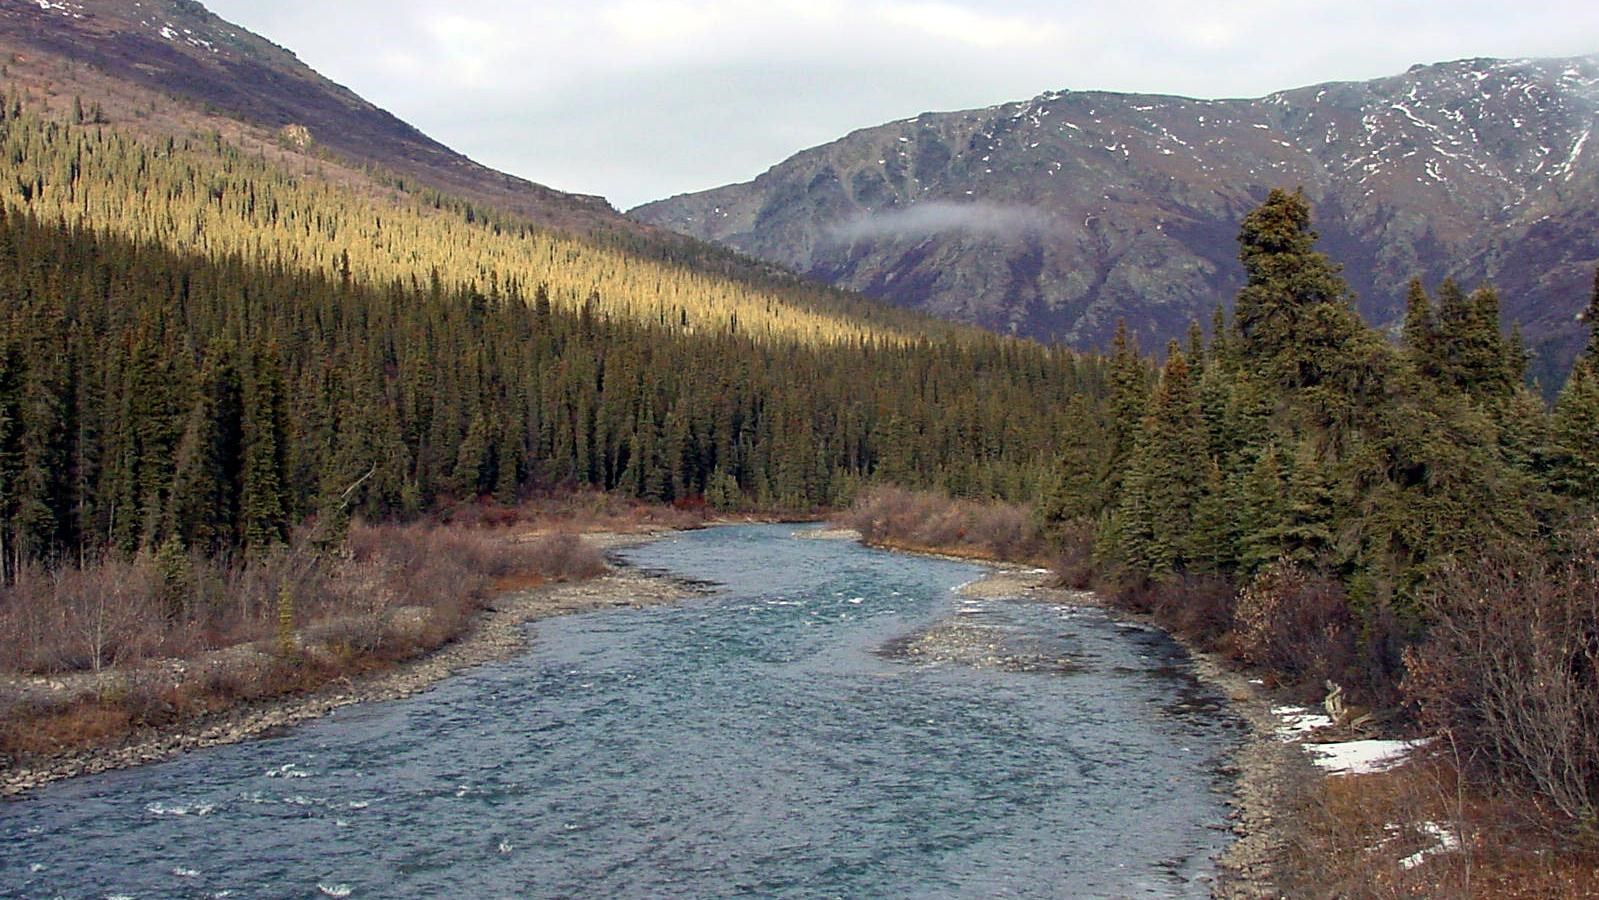 A gently flowing river with spruce trees and a mountain in the distance.